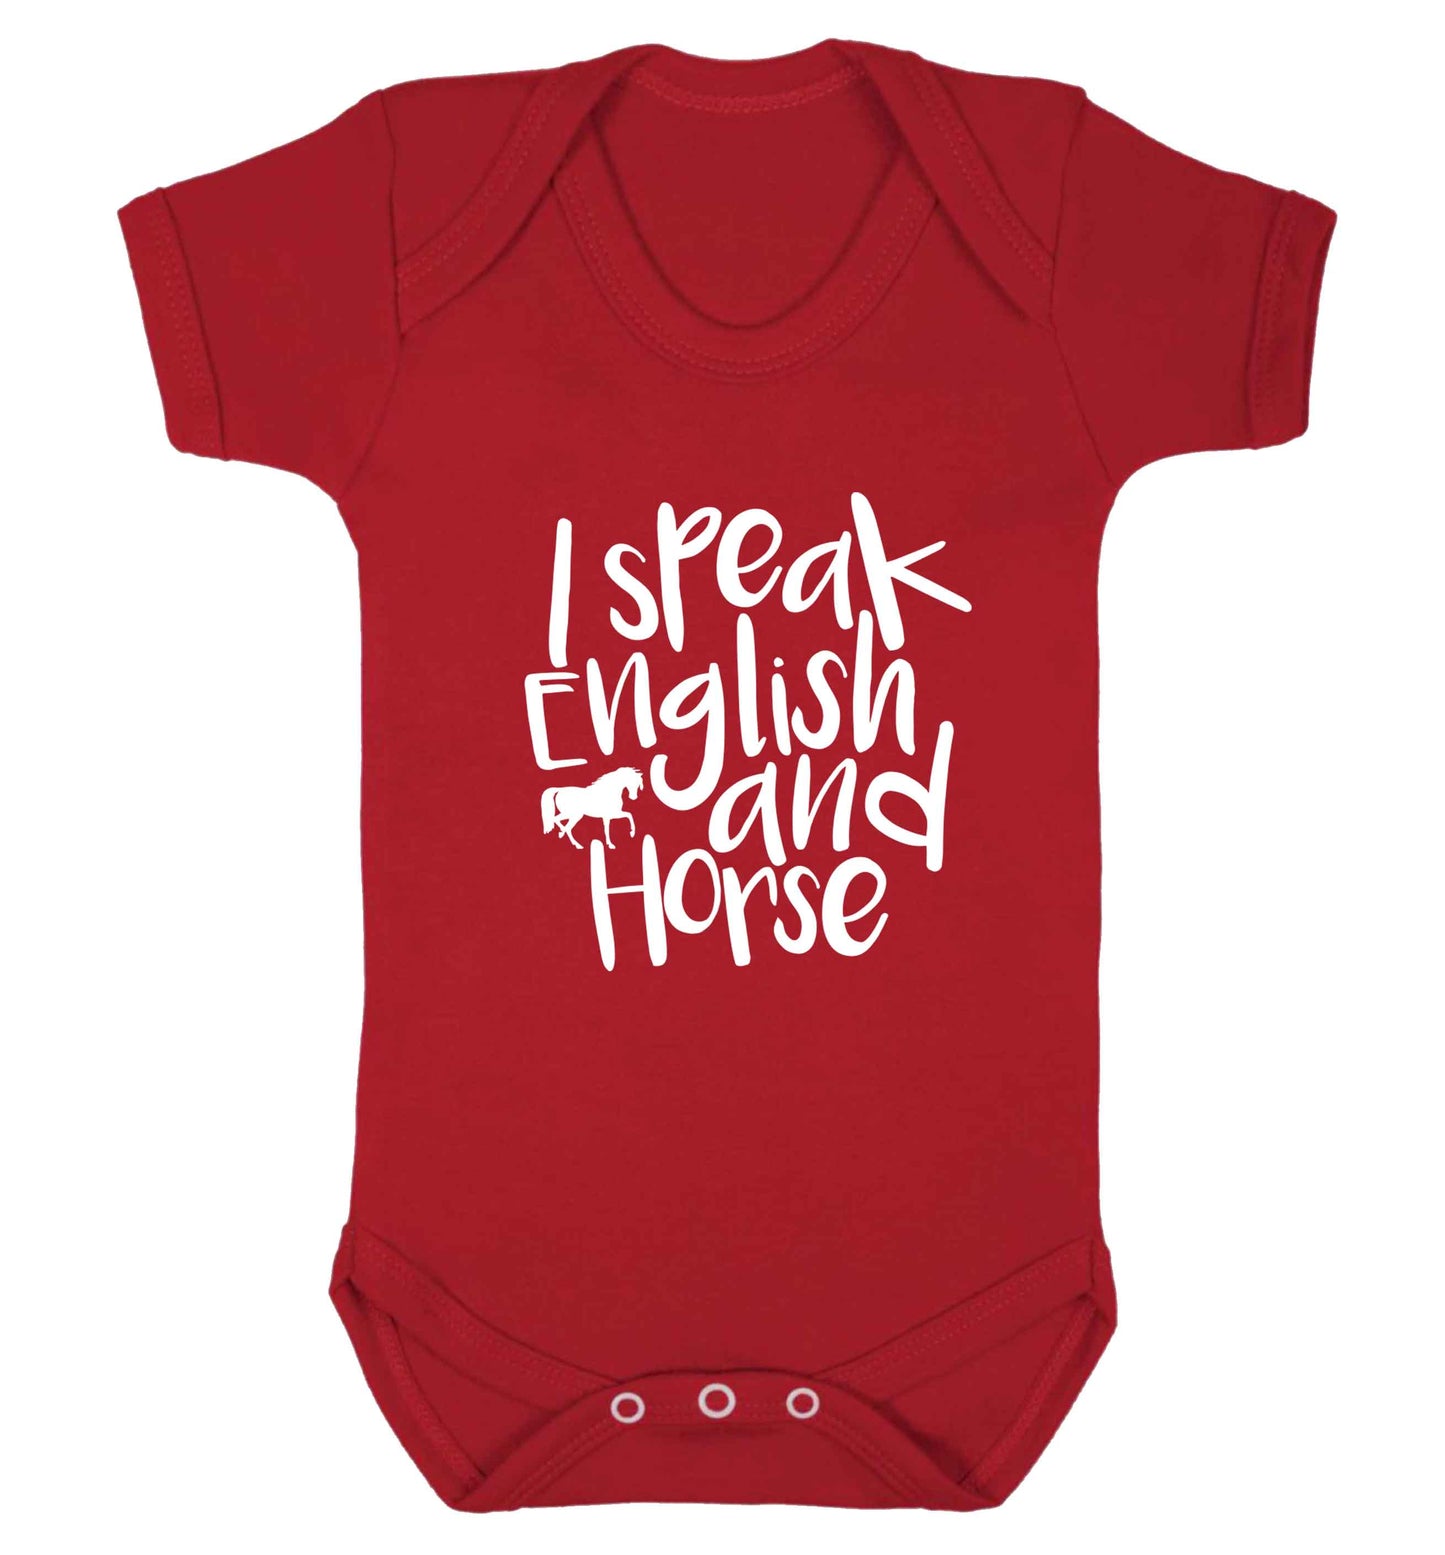 I speak English and horse baby vest red 18-24 months